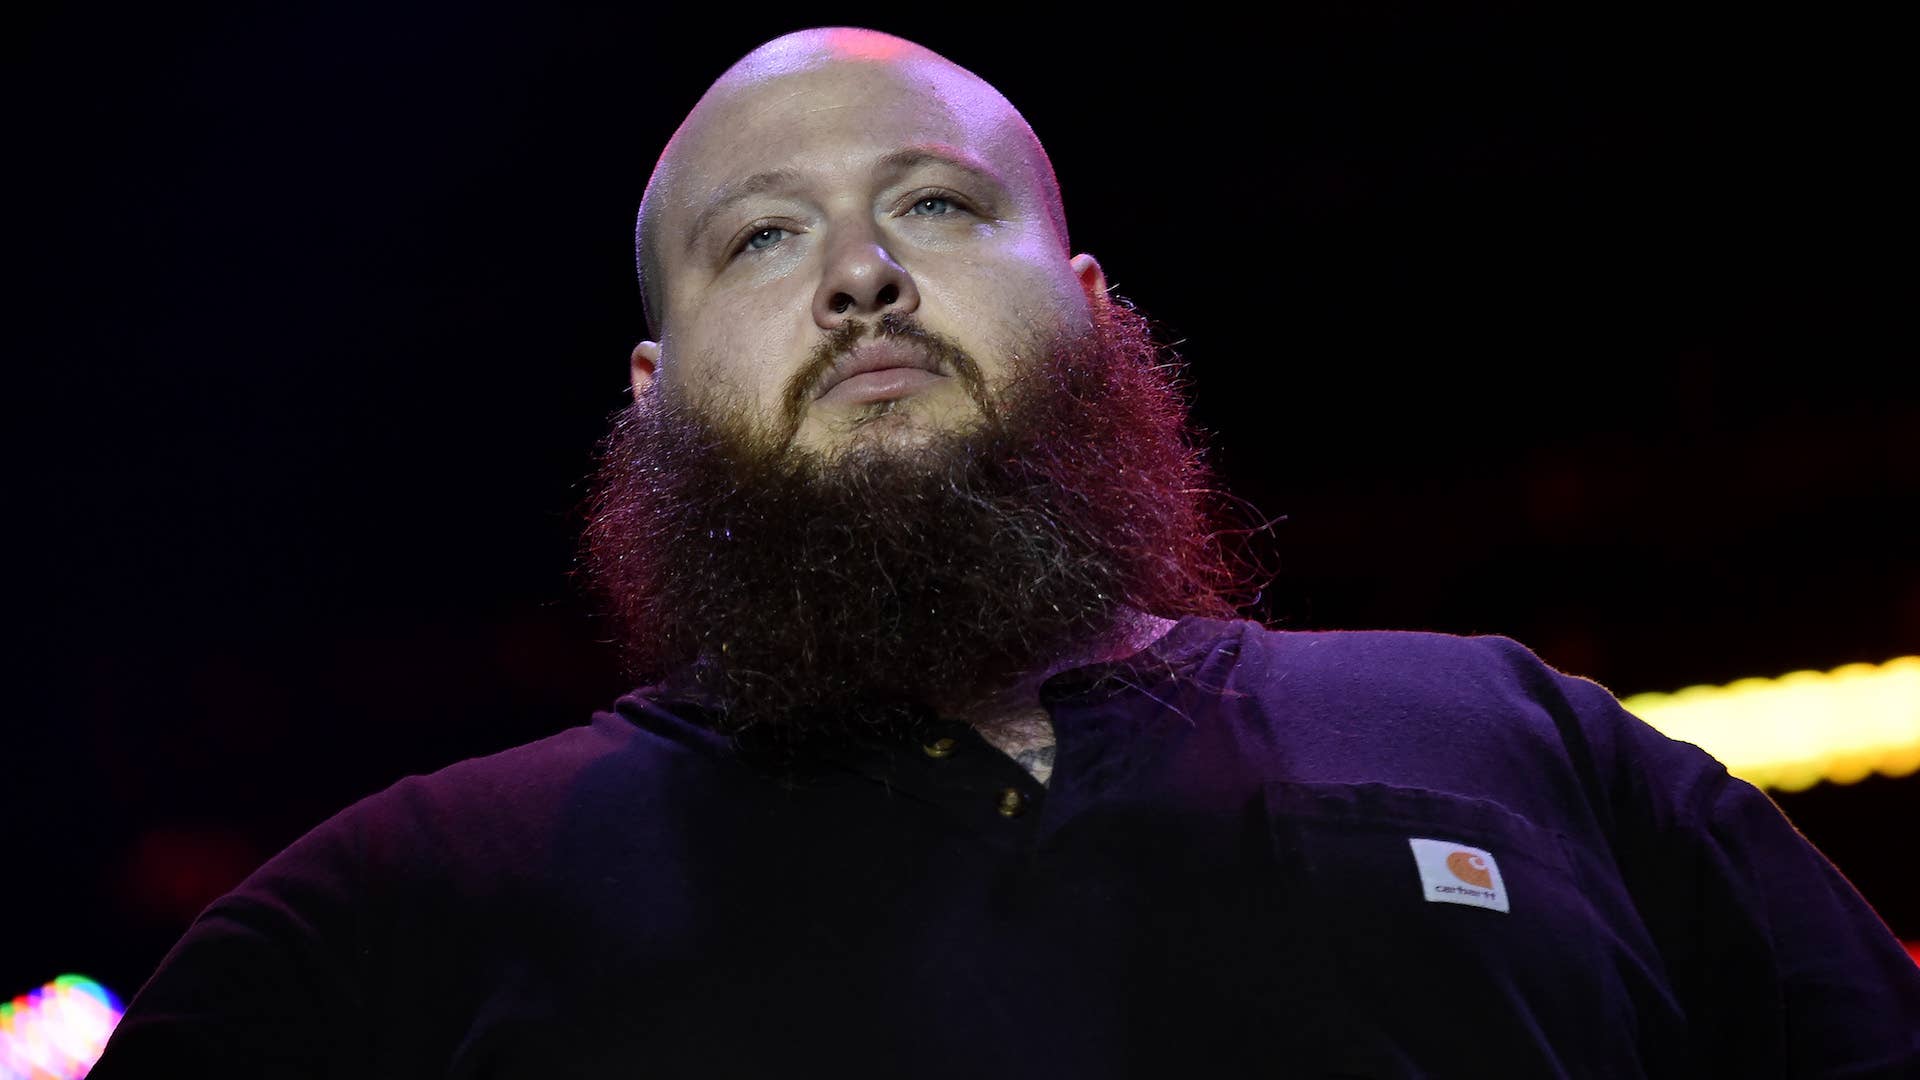 Action Bronson Shares Workout Video, Says He's Now Lost 80 Pounds